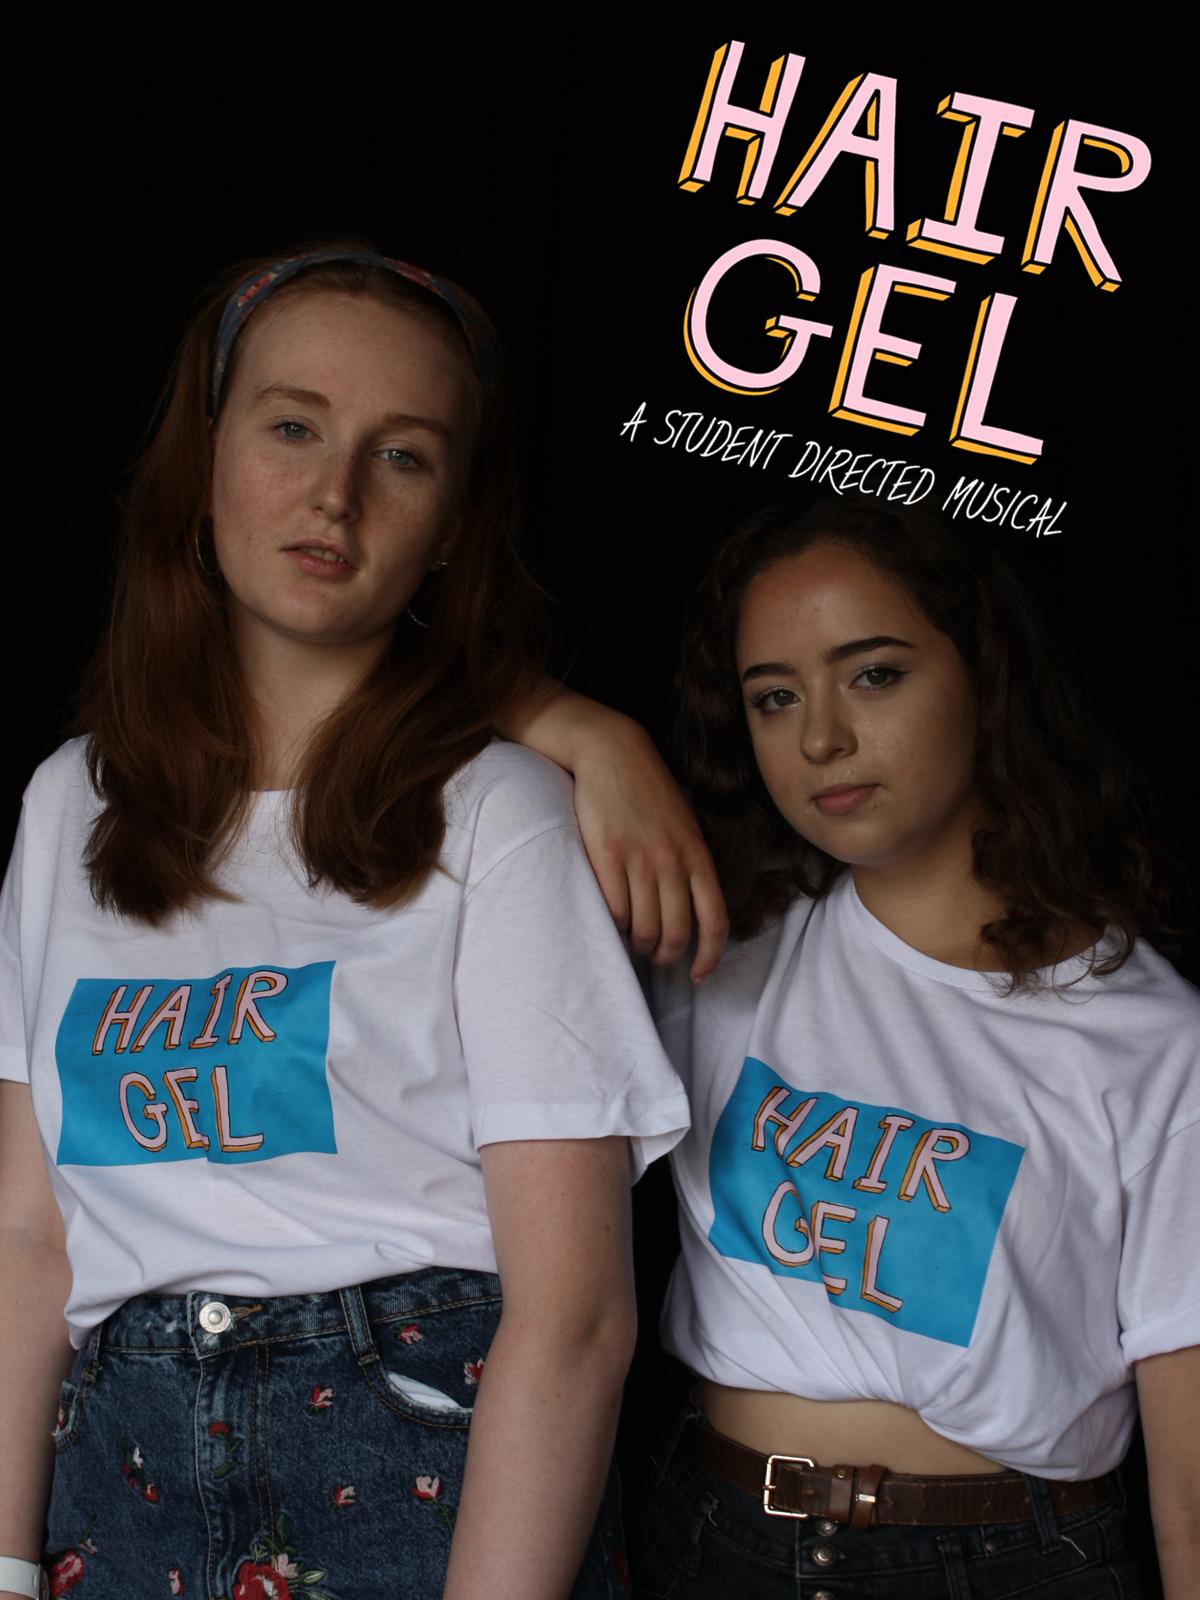 Hair Gel: A Student Directed Musical